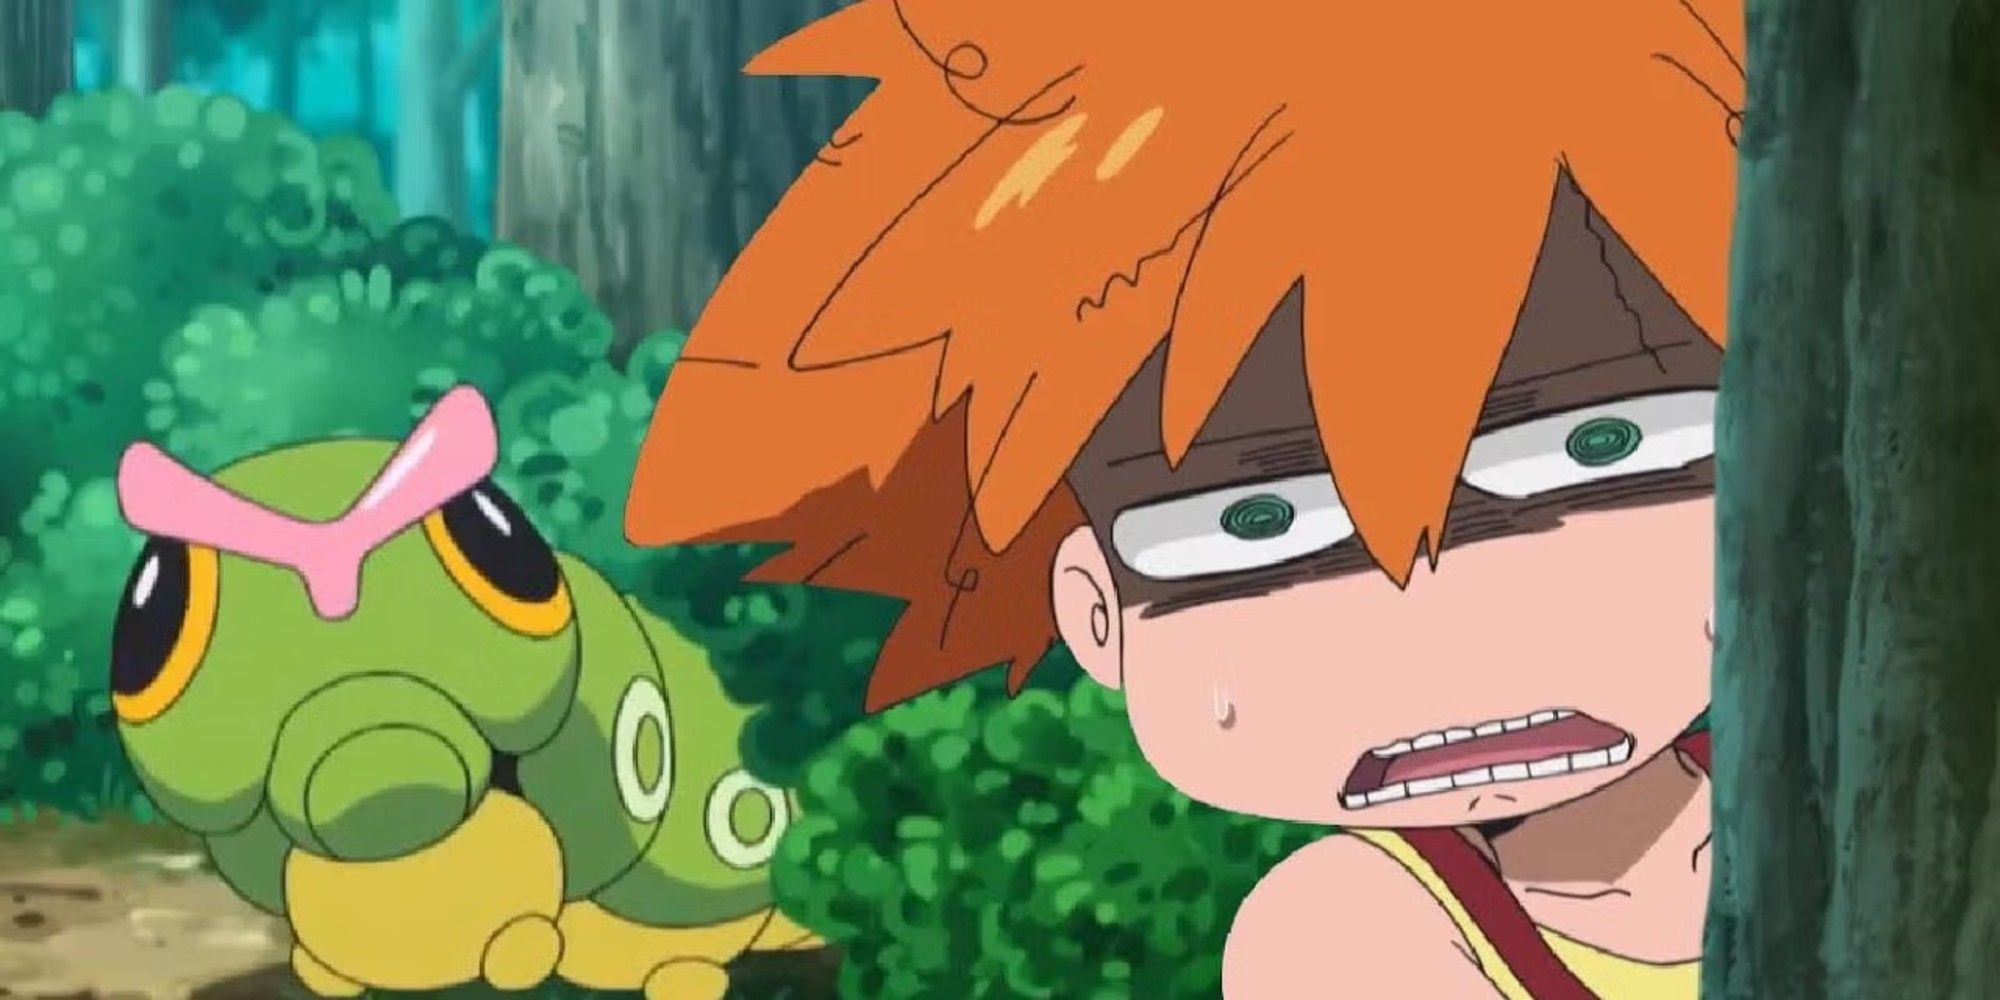 Misty afraid of Caterpie, making a terrified face in a forest